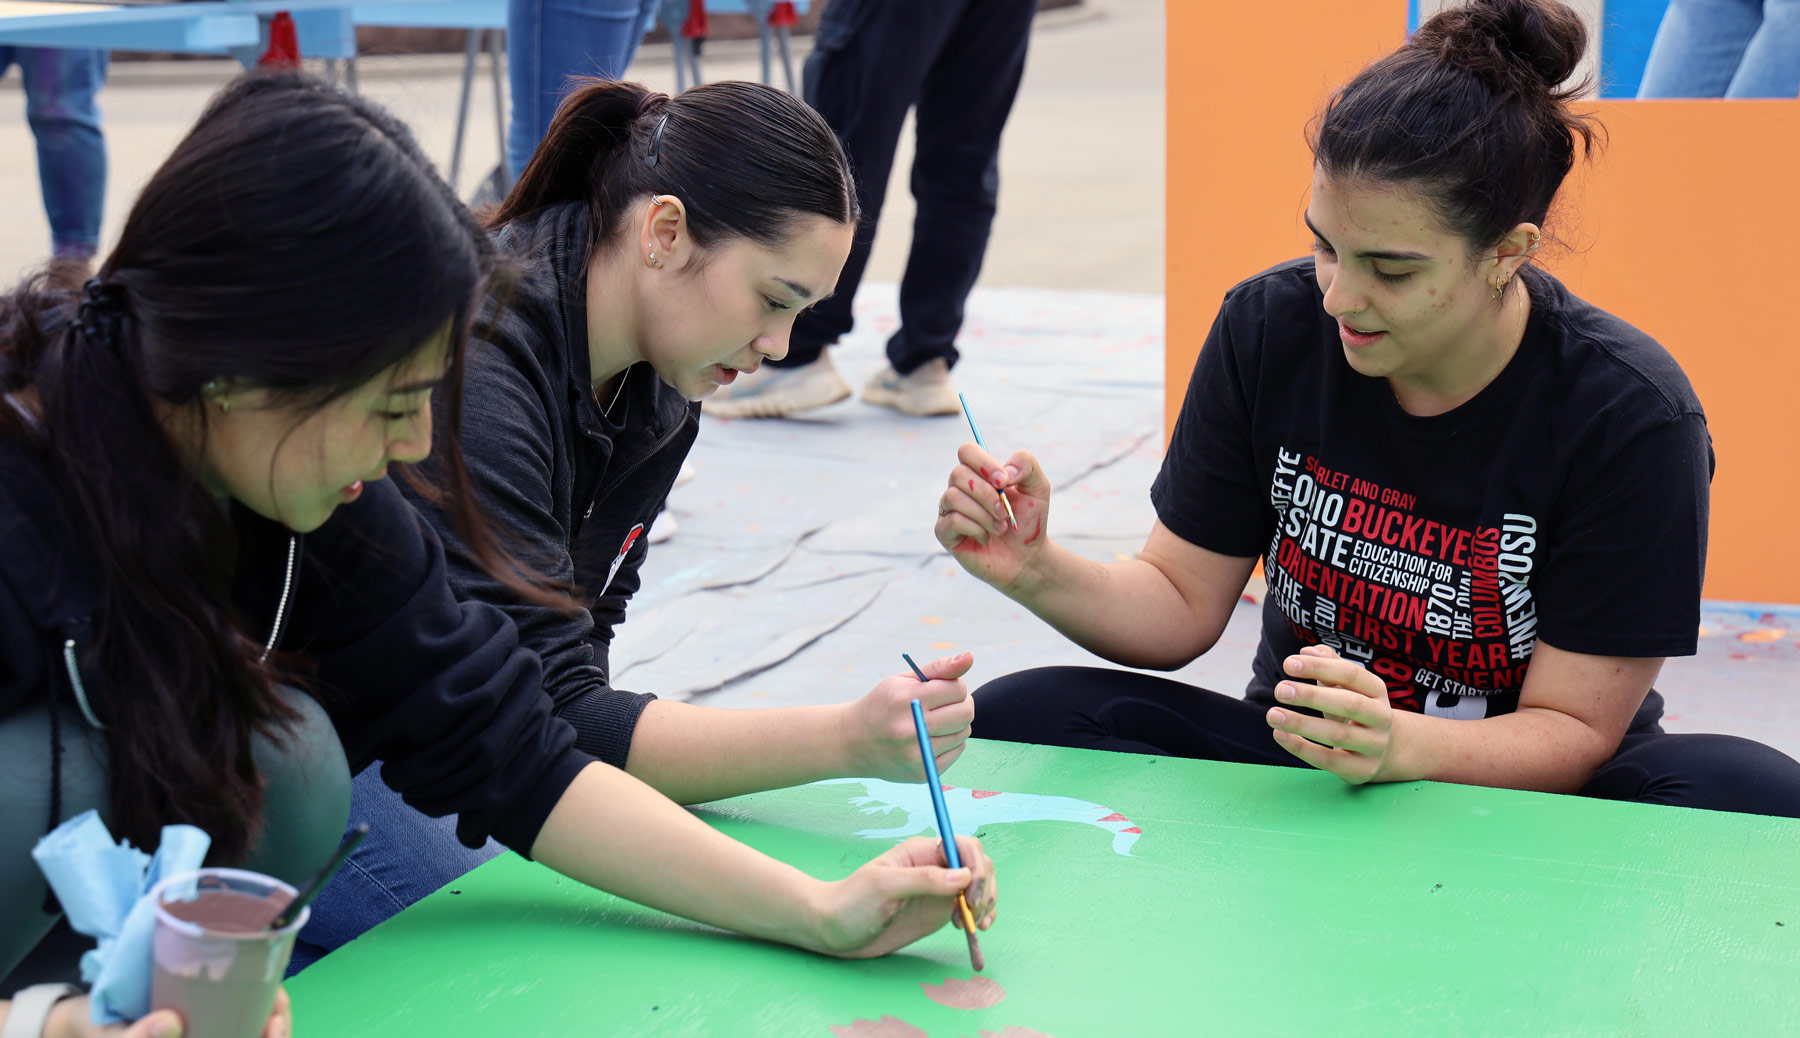 Three public health students paint on a playhouse as part of a service project benefitting a local family.